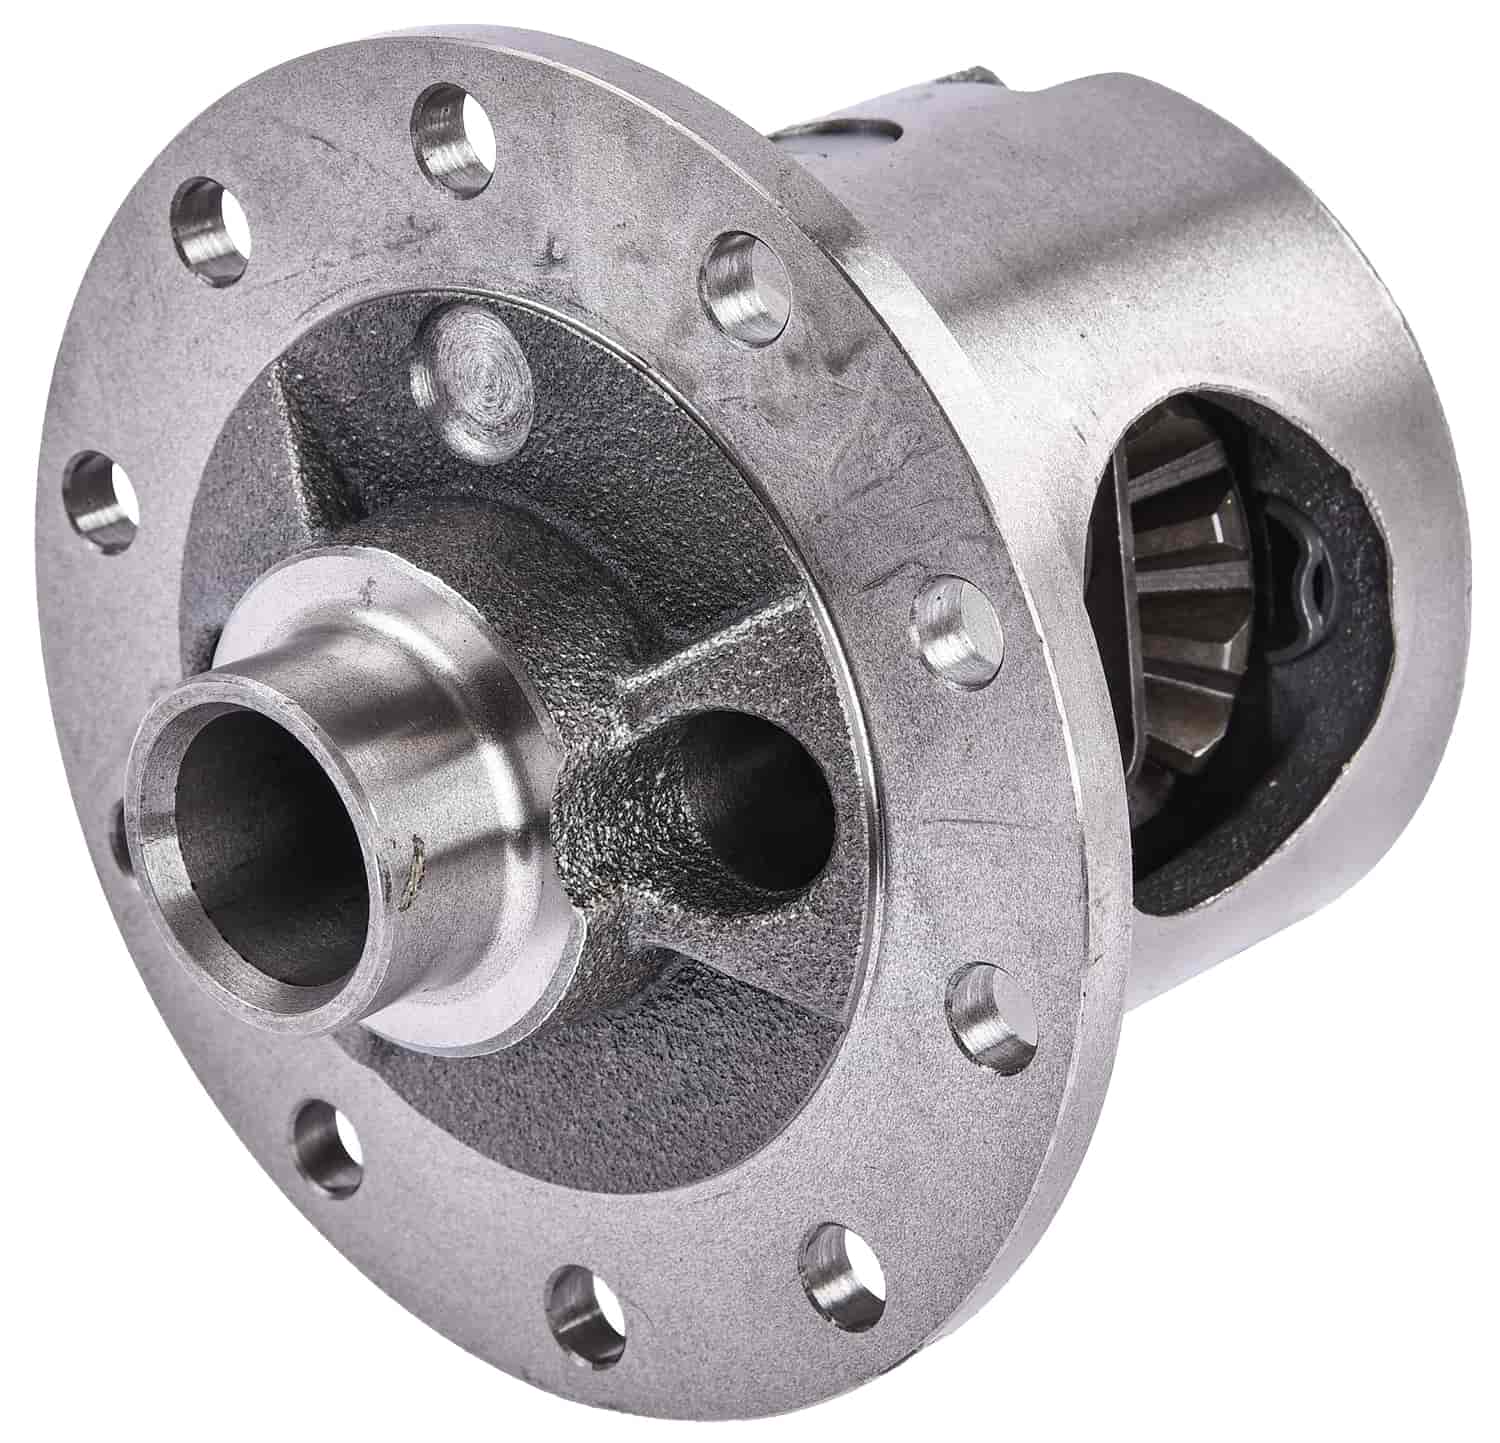 Posi Traction Differential for Ford Cars/Trucks Rear, Ford 7.5" 28-SPLINE [All Ratios]